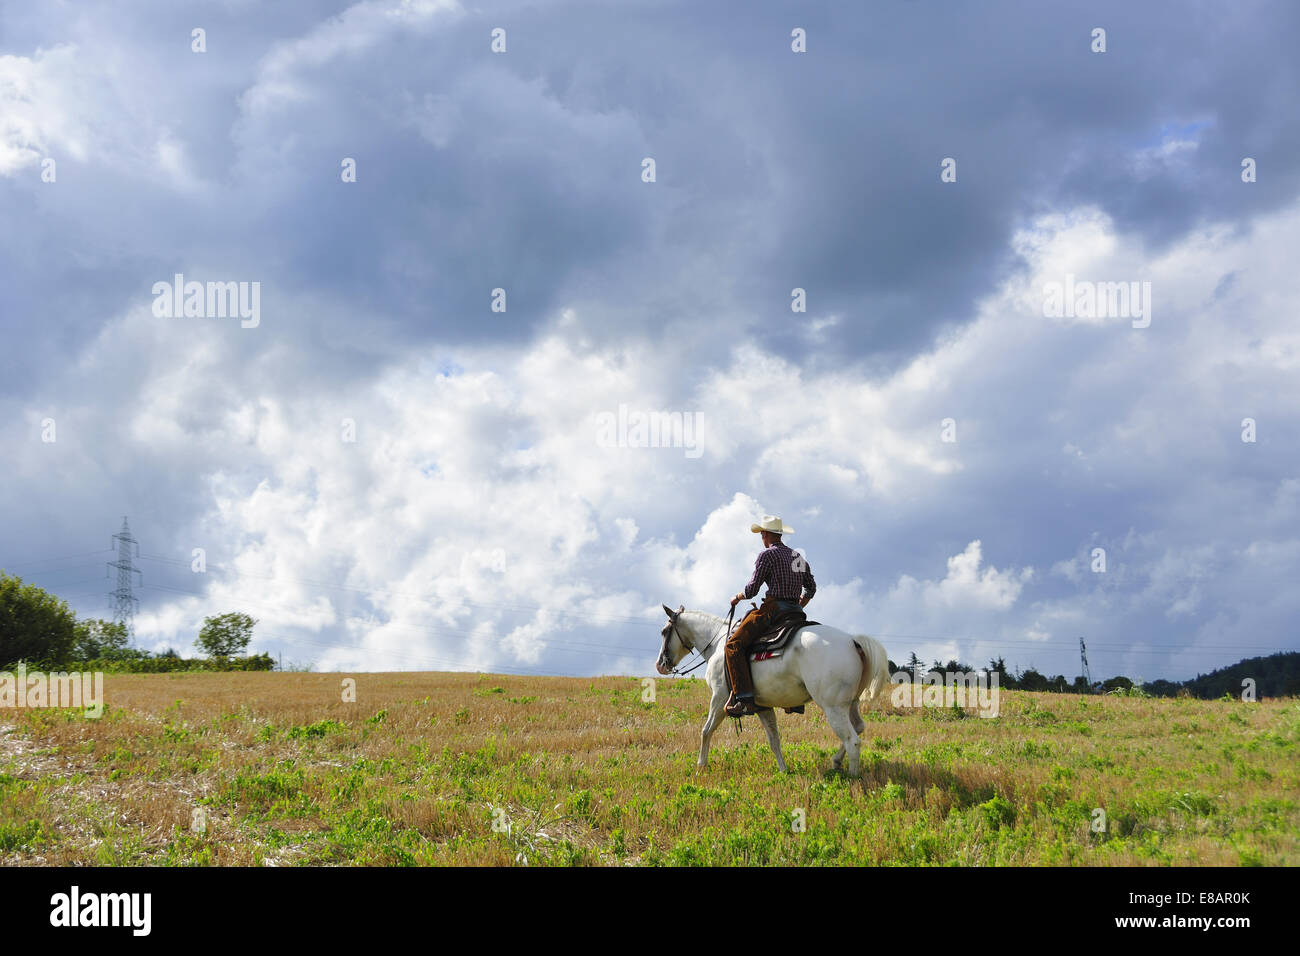 Young man in cowboy gear riding horse in field Stock Photo